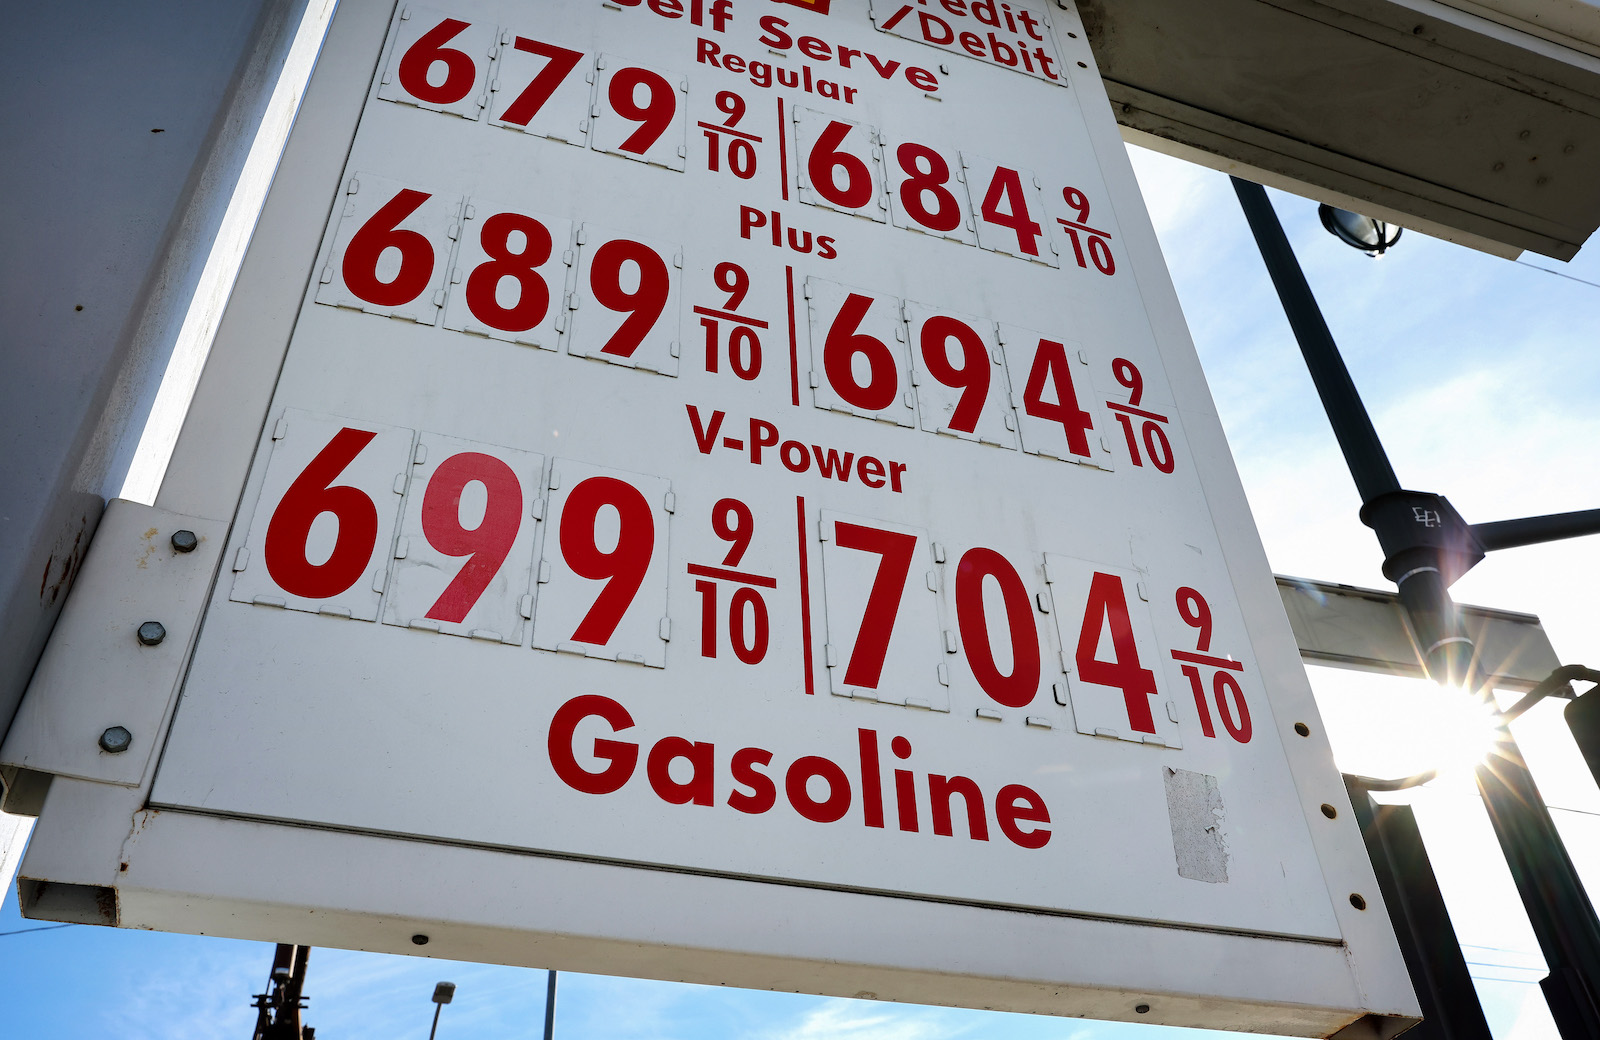 A gas station sign in California shows prices almost reaching $7.